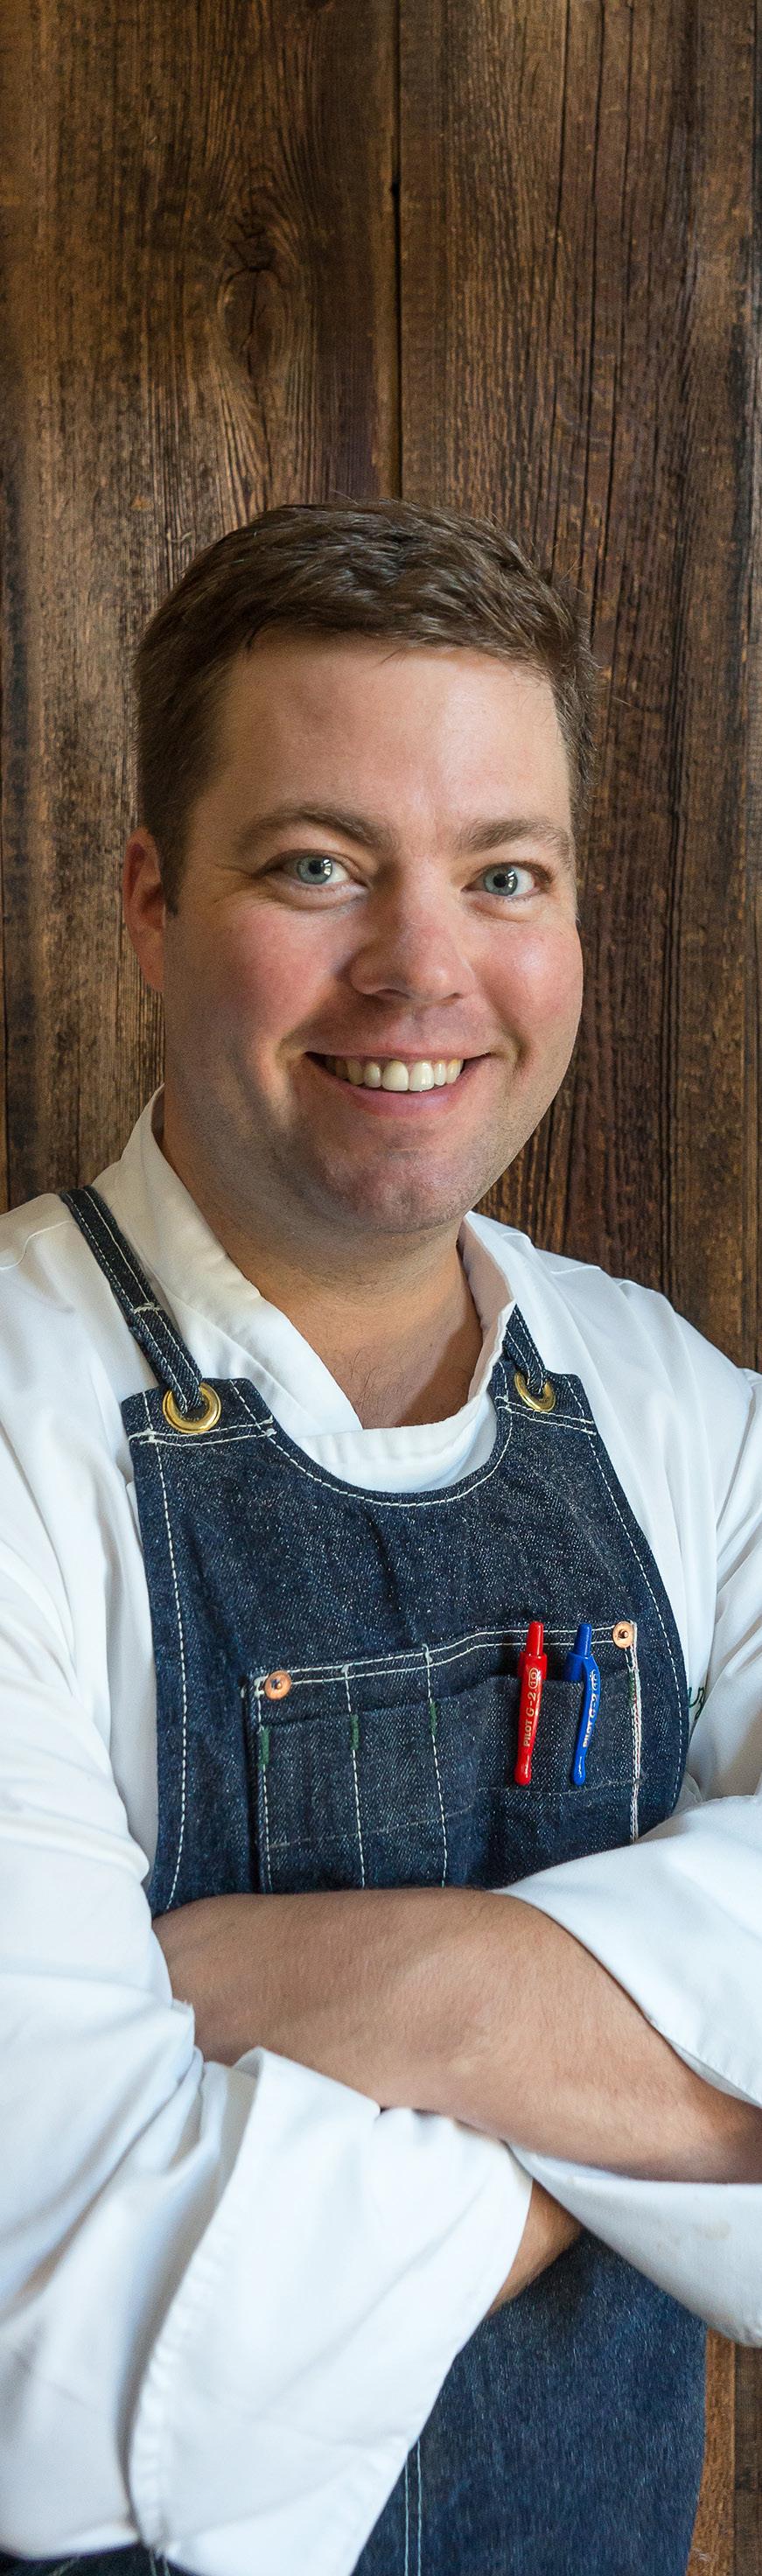 GEOFF LAZLO Managing Partner and Executive Chef, Mill Street Bar & Table Geoff s approach as a chef is heavily influenced by a community-minded spirit, close relationships with farmers and a decade